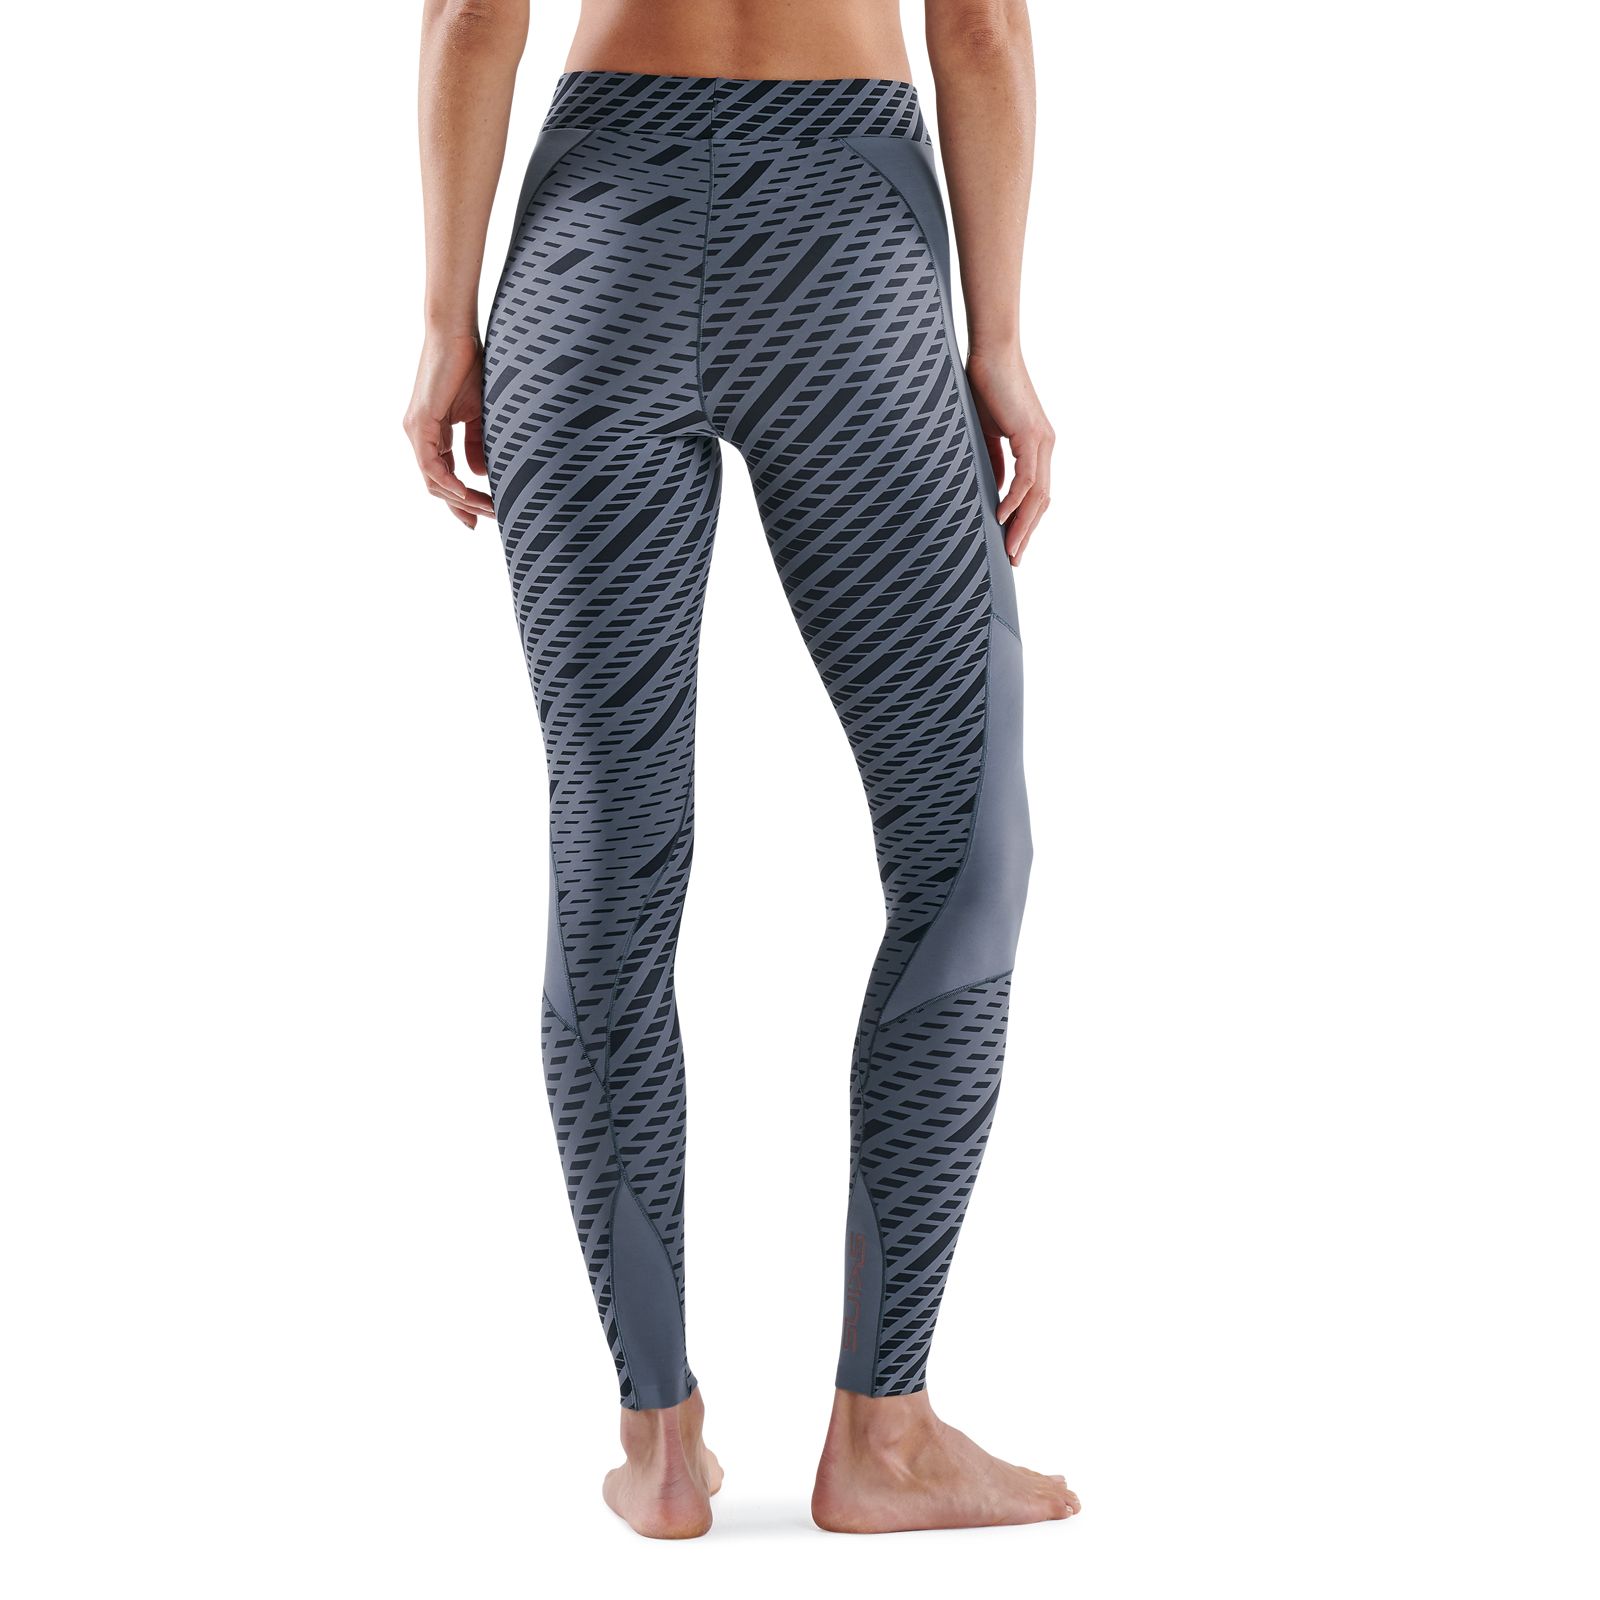 SKINS SERIES-5 WOMEN'S LONG TIGHTS CHARCOAL FADE - SKINS Compression USA